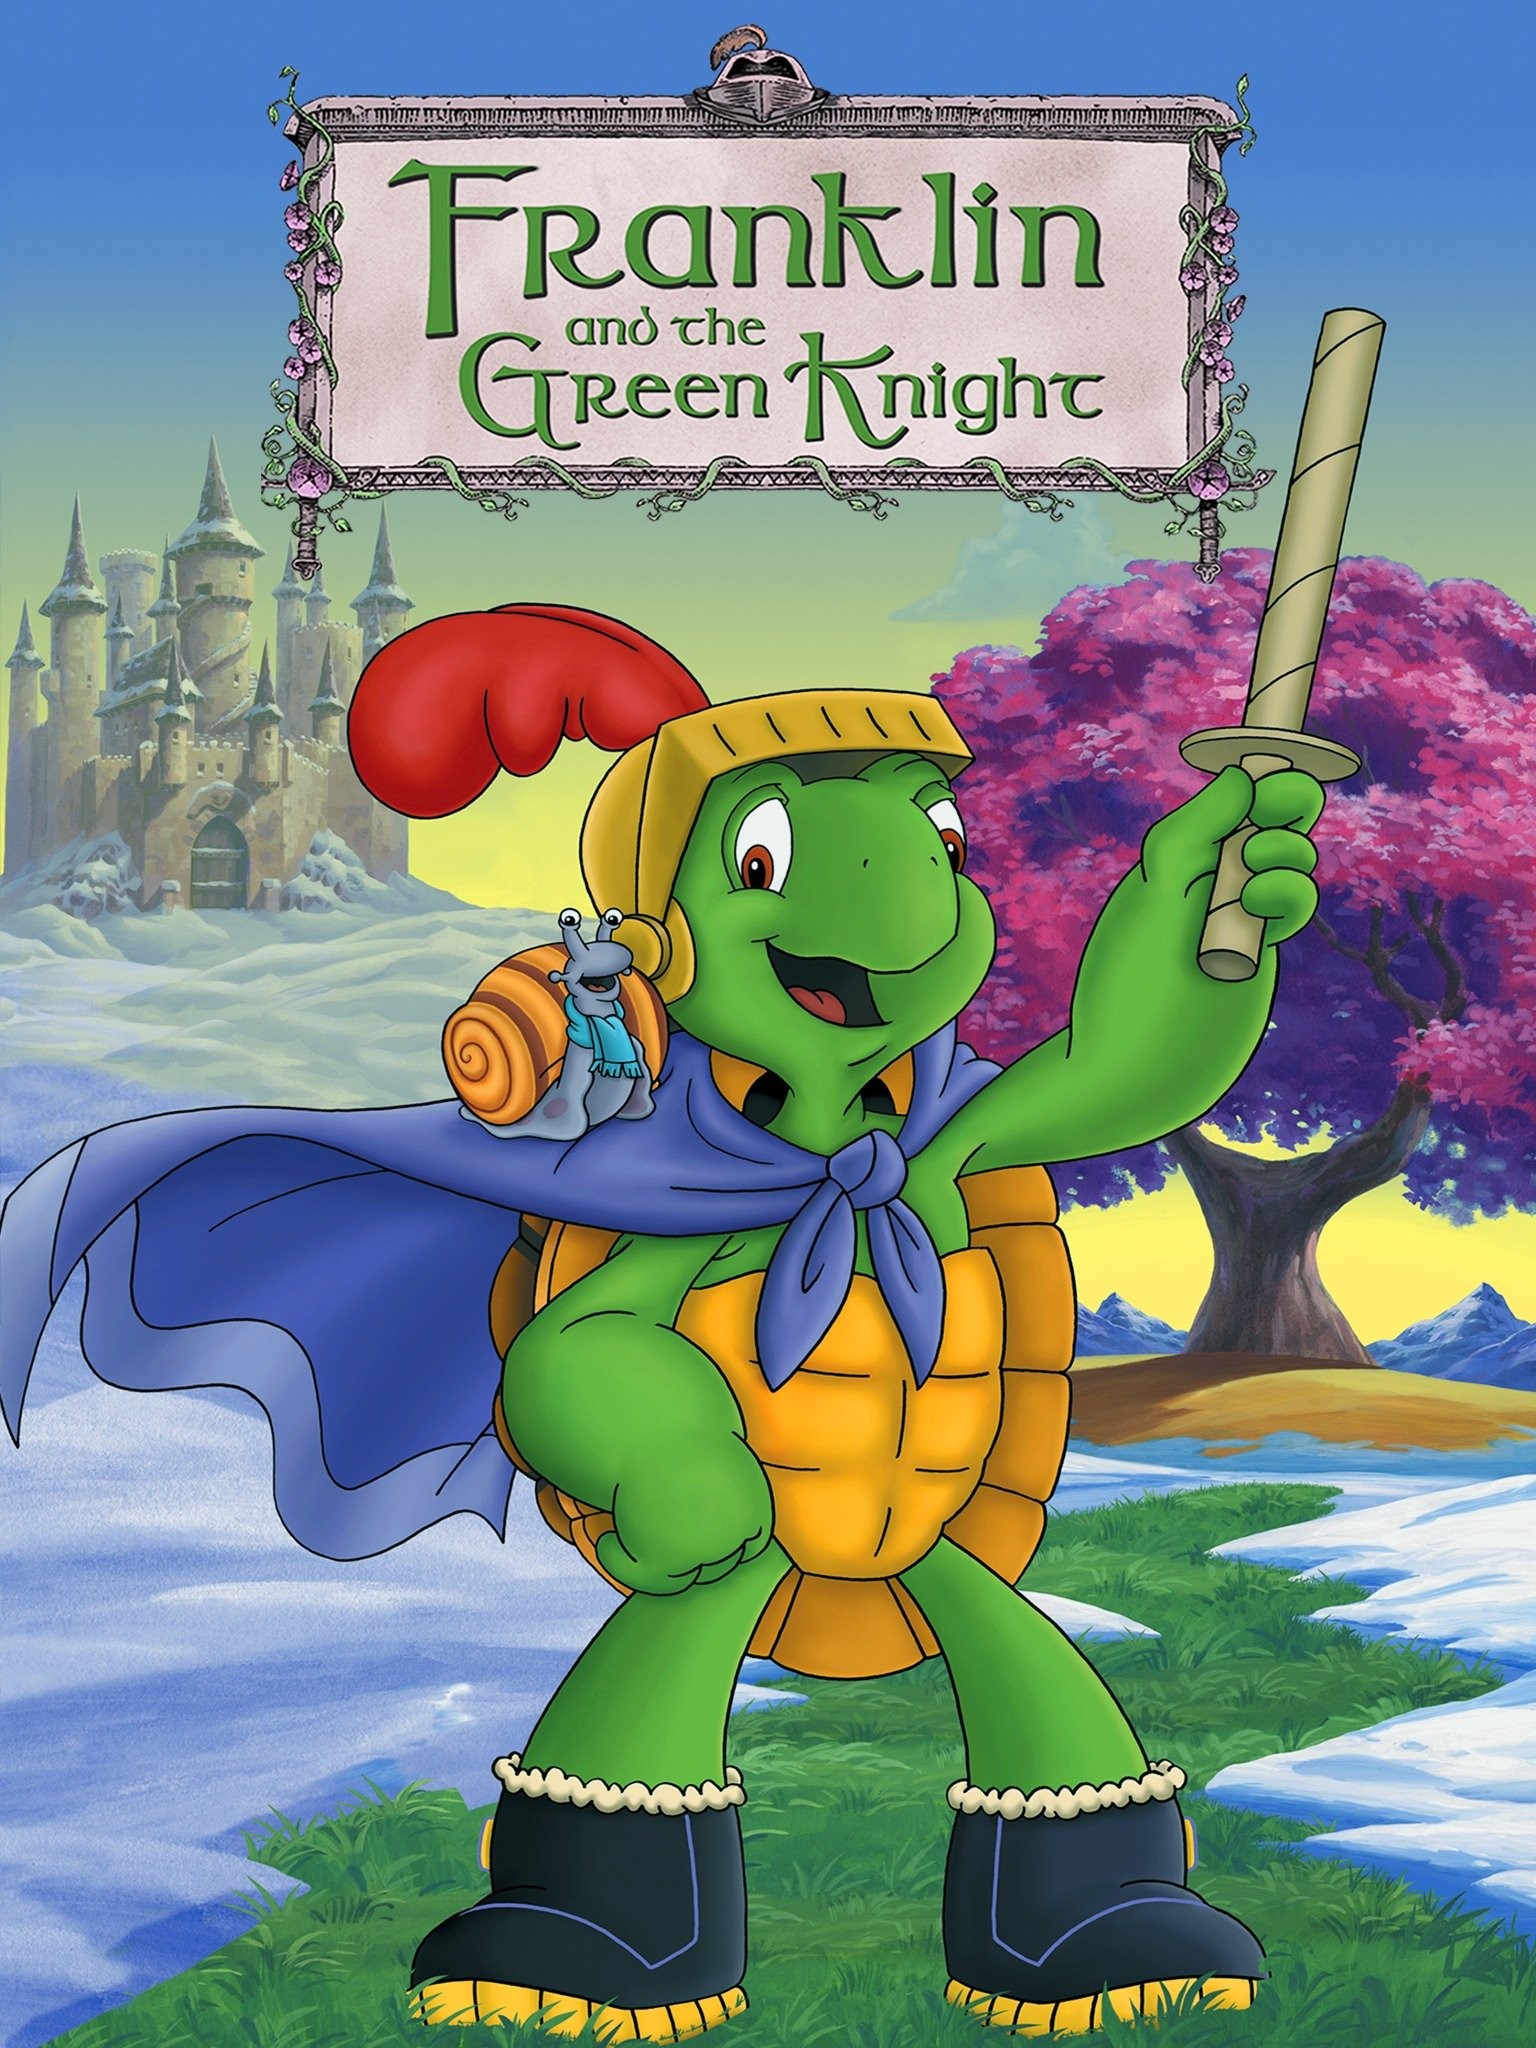 The Green Knight - Rotten Tomatoes